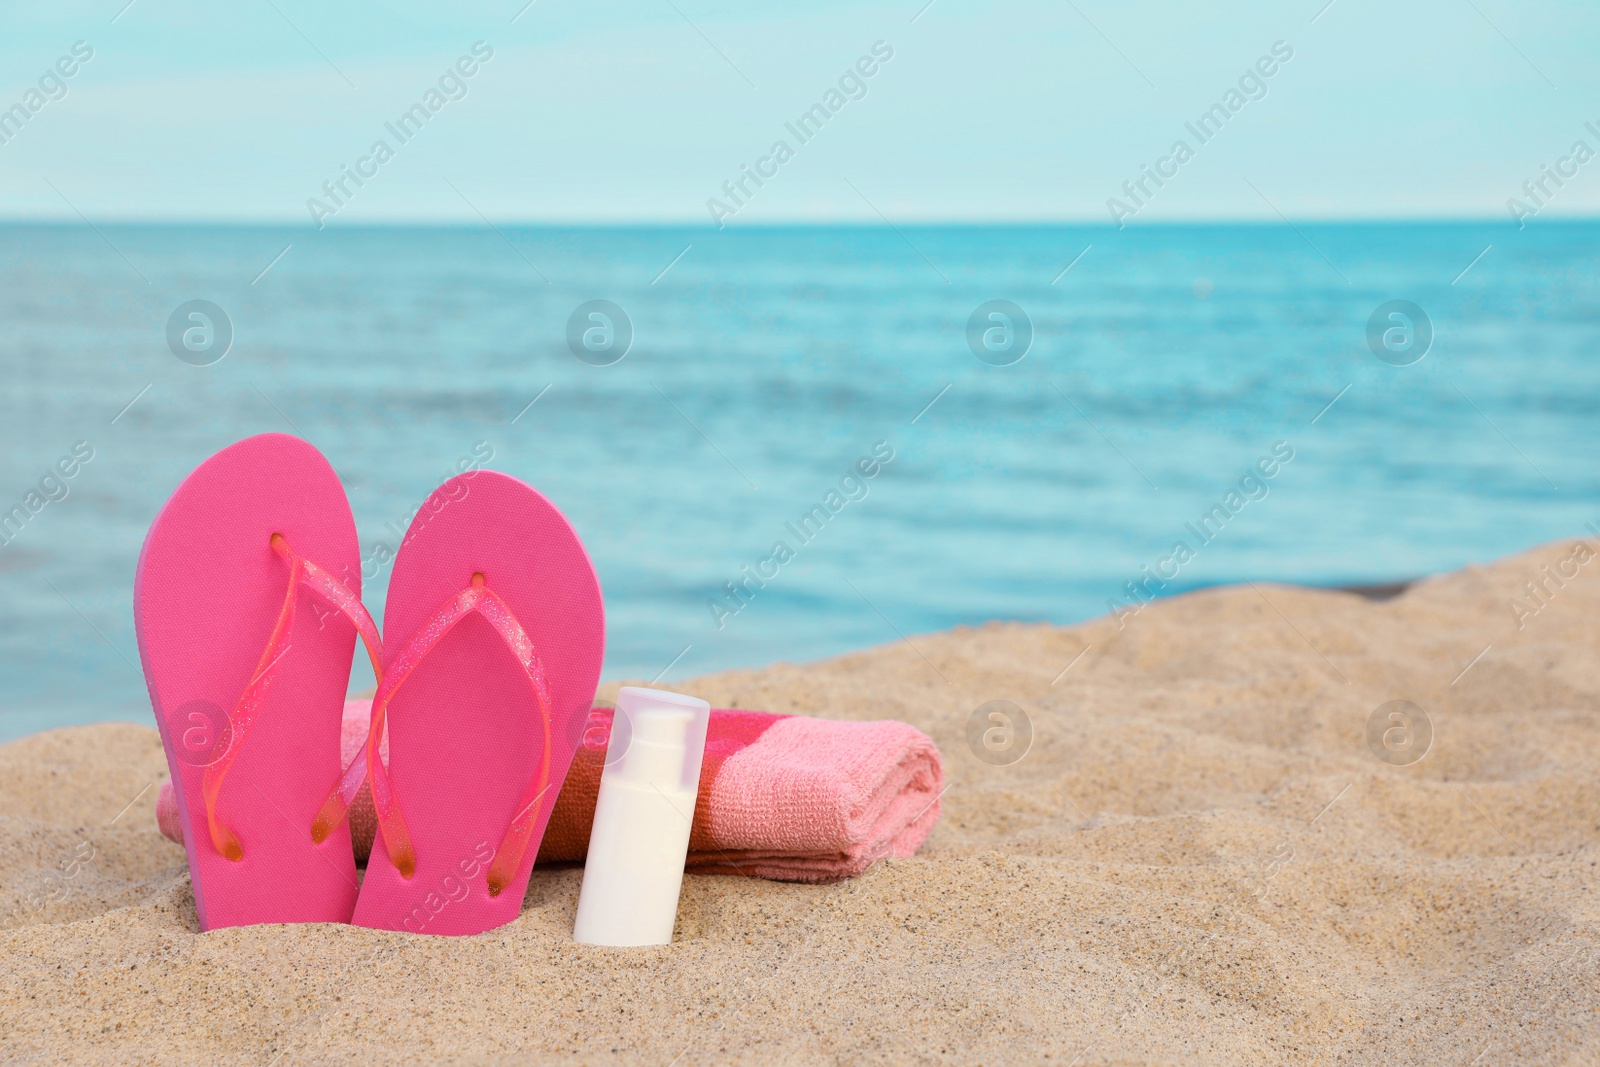 Photo of Beach towel, slippers and sunscreen on sand near sea, space for text